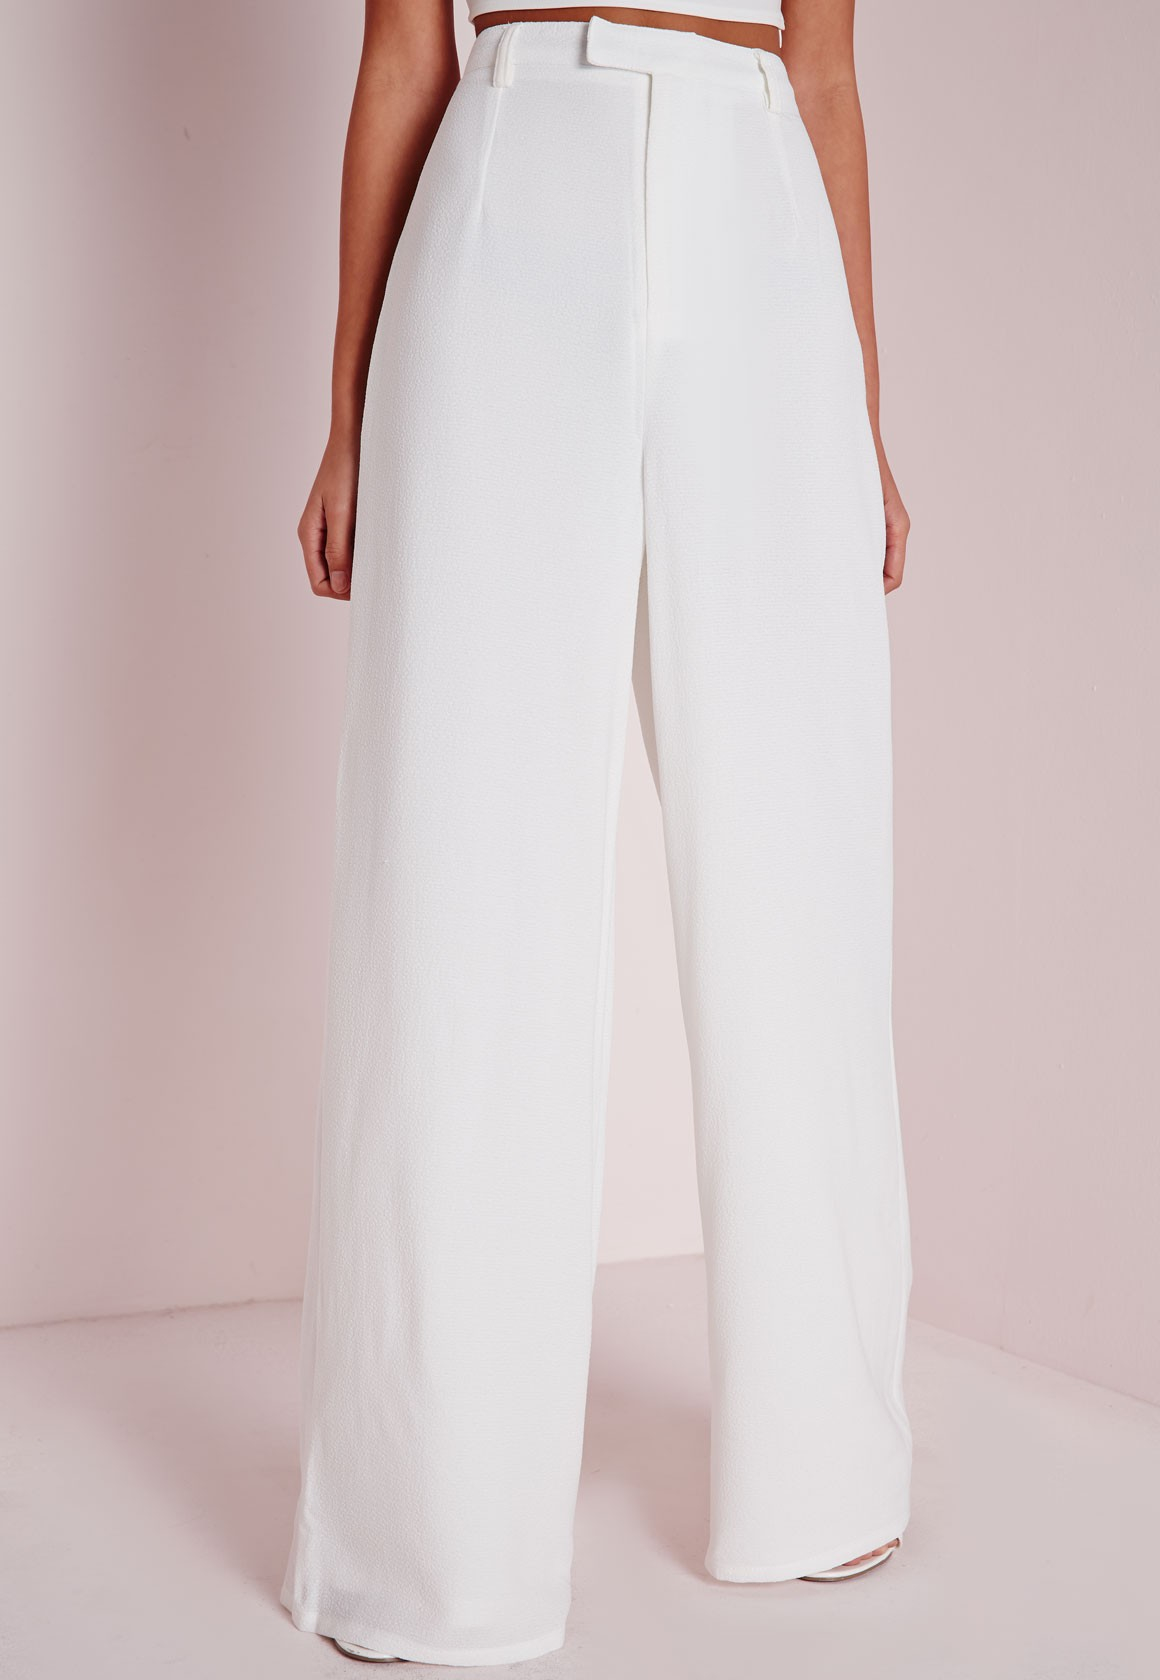 Missguided Synthetic Tall Premium Crepe Wide Leg Pants White - Lyst